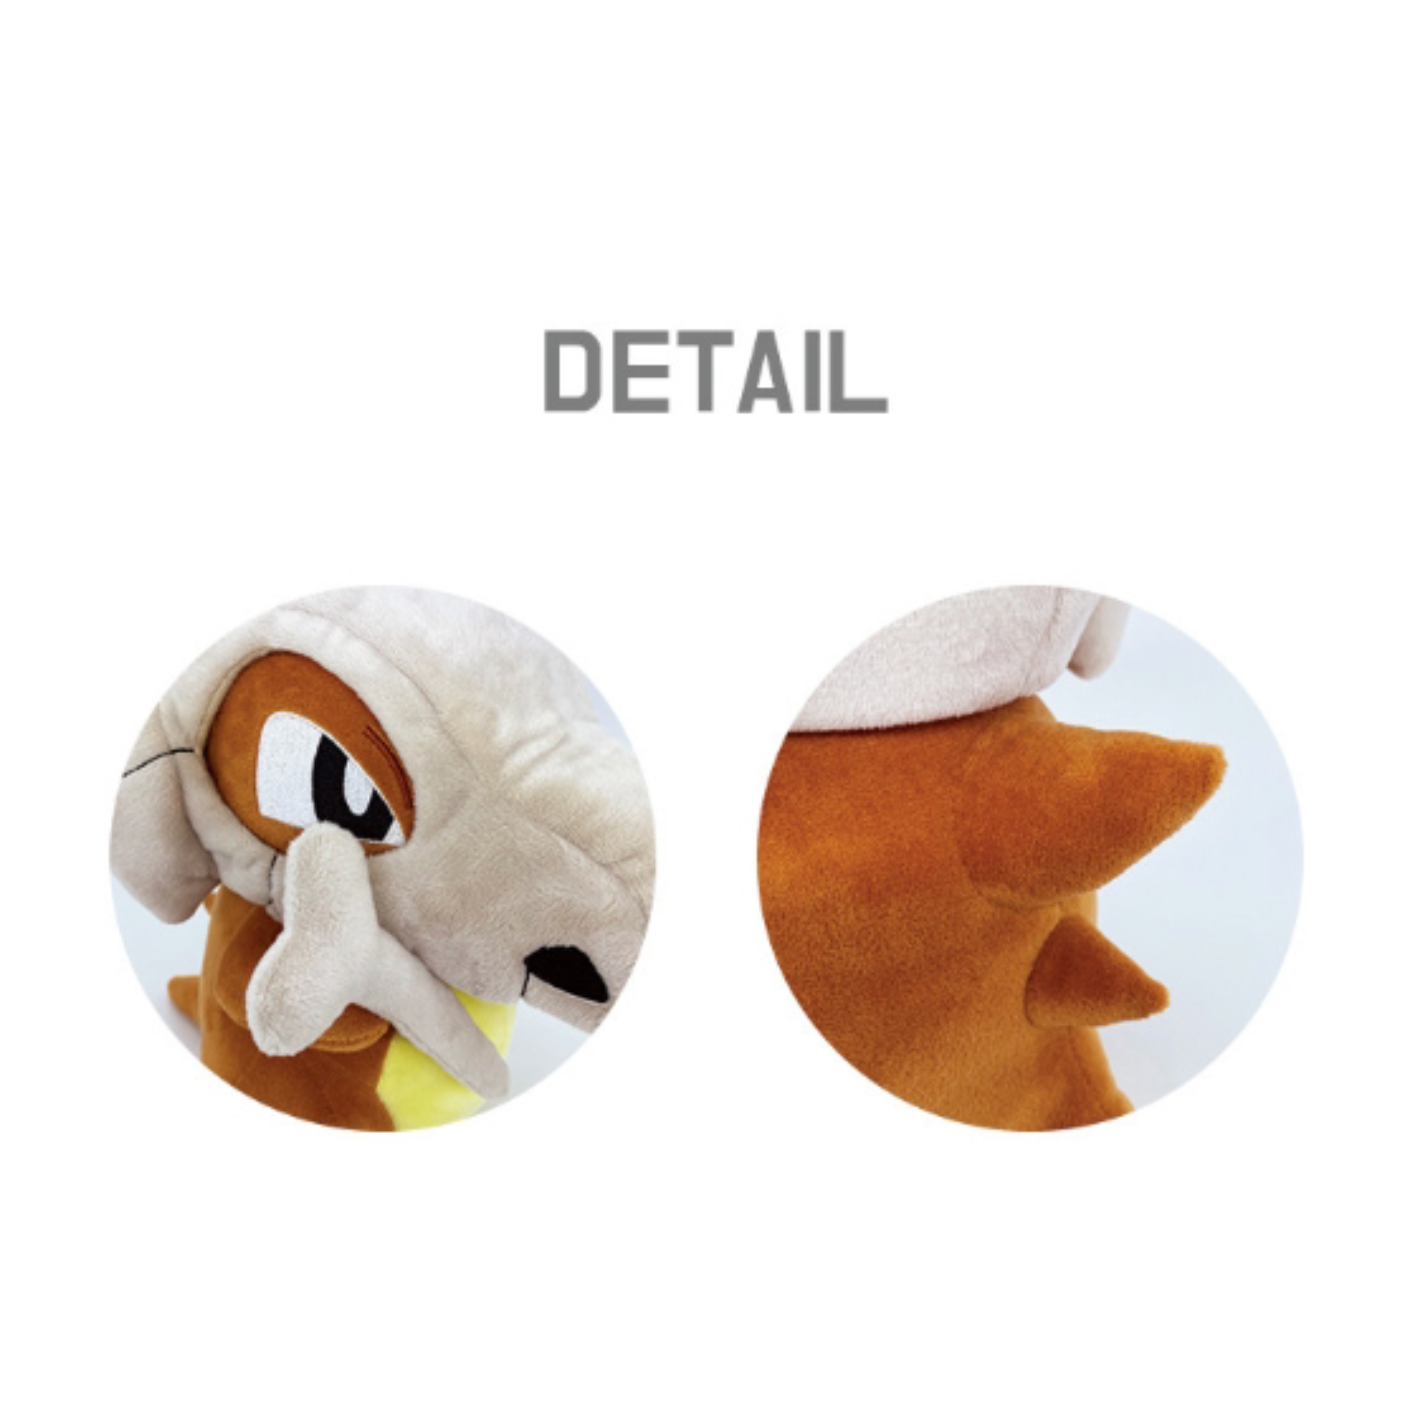 Pokemon Cubone with Mask 9" Inch Plush Toys Stuffed Dolls Cute Figures for Children Gift